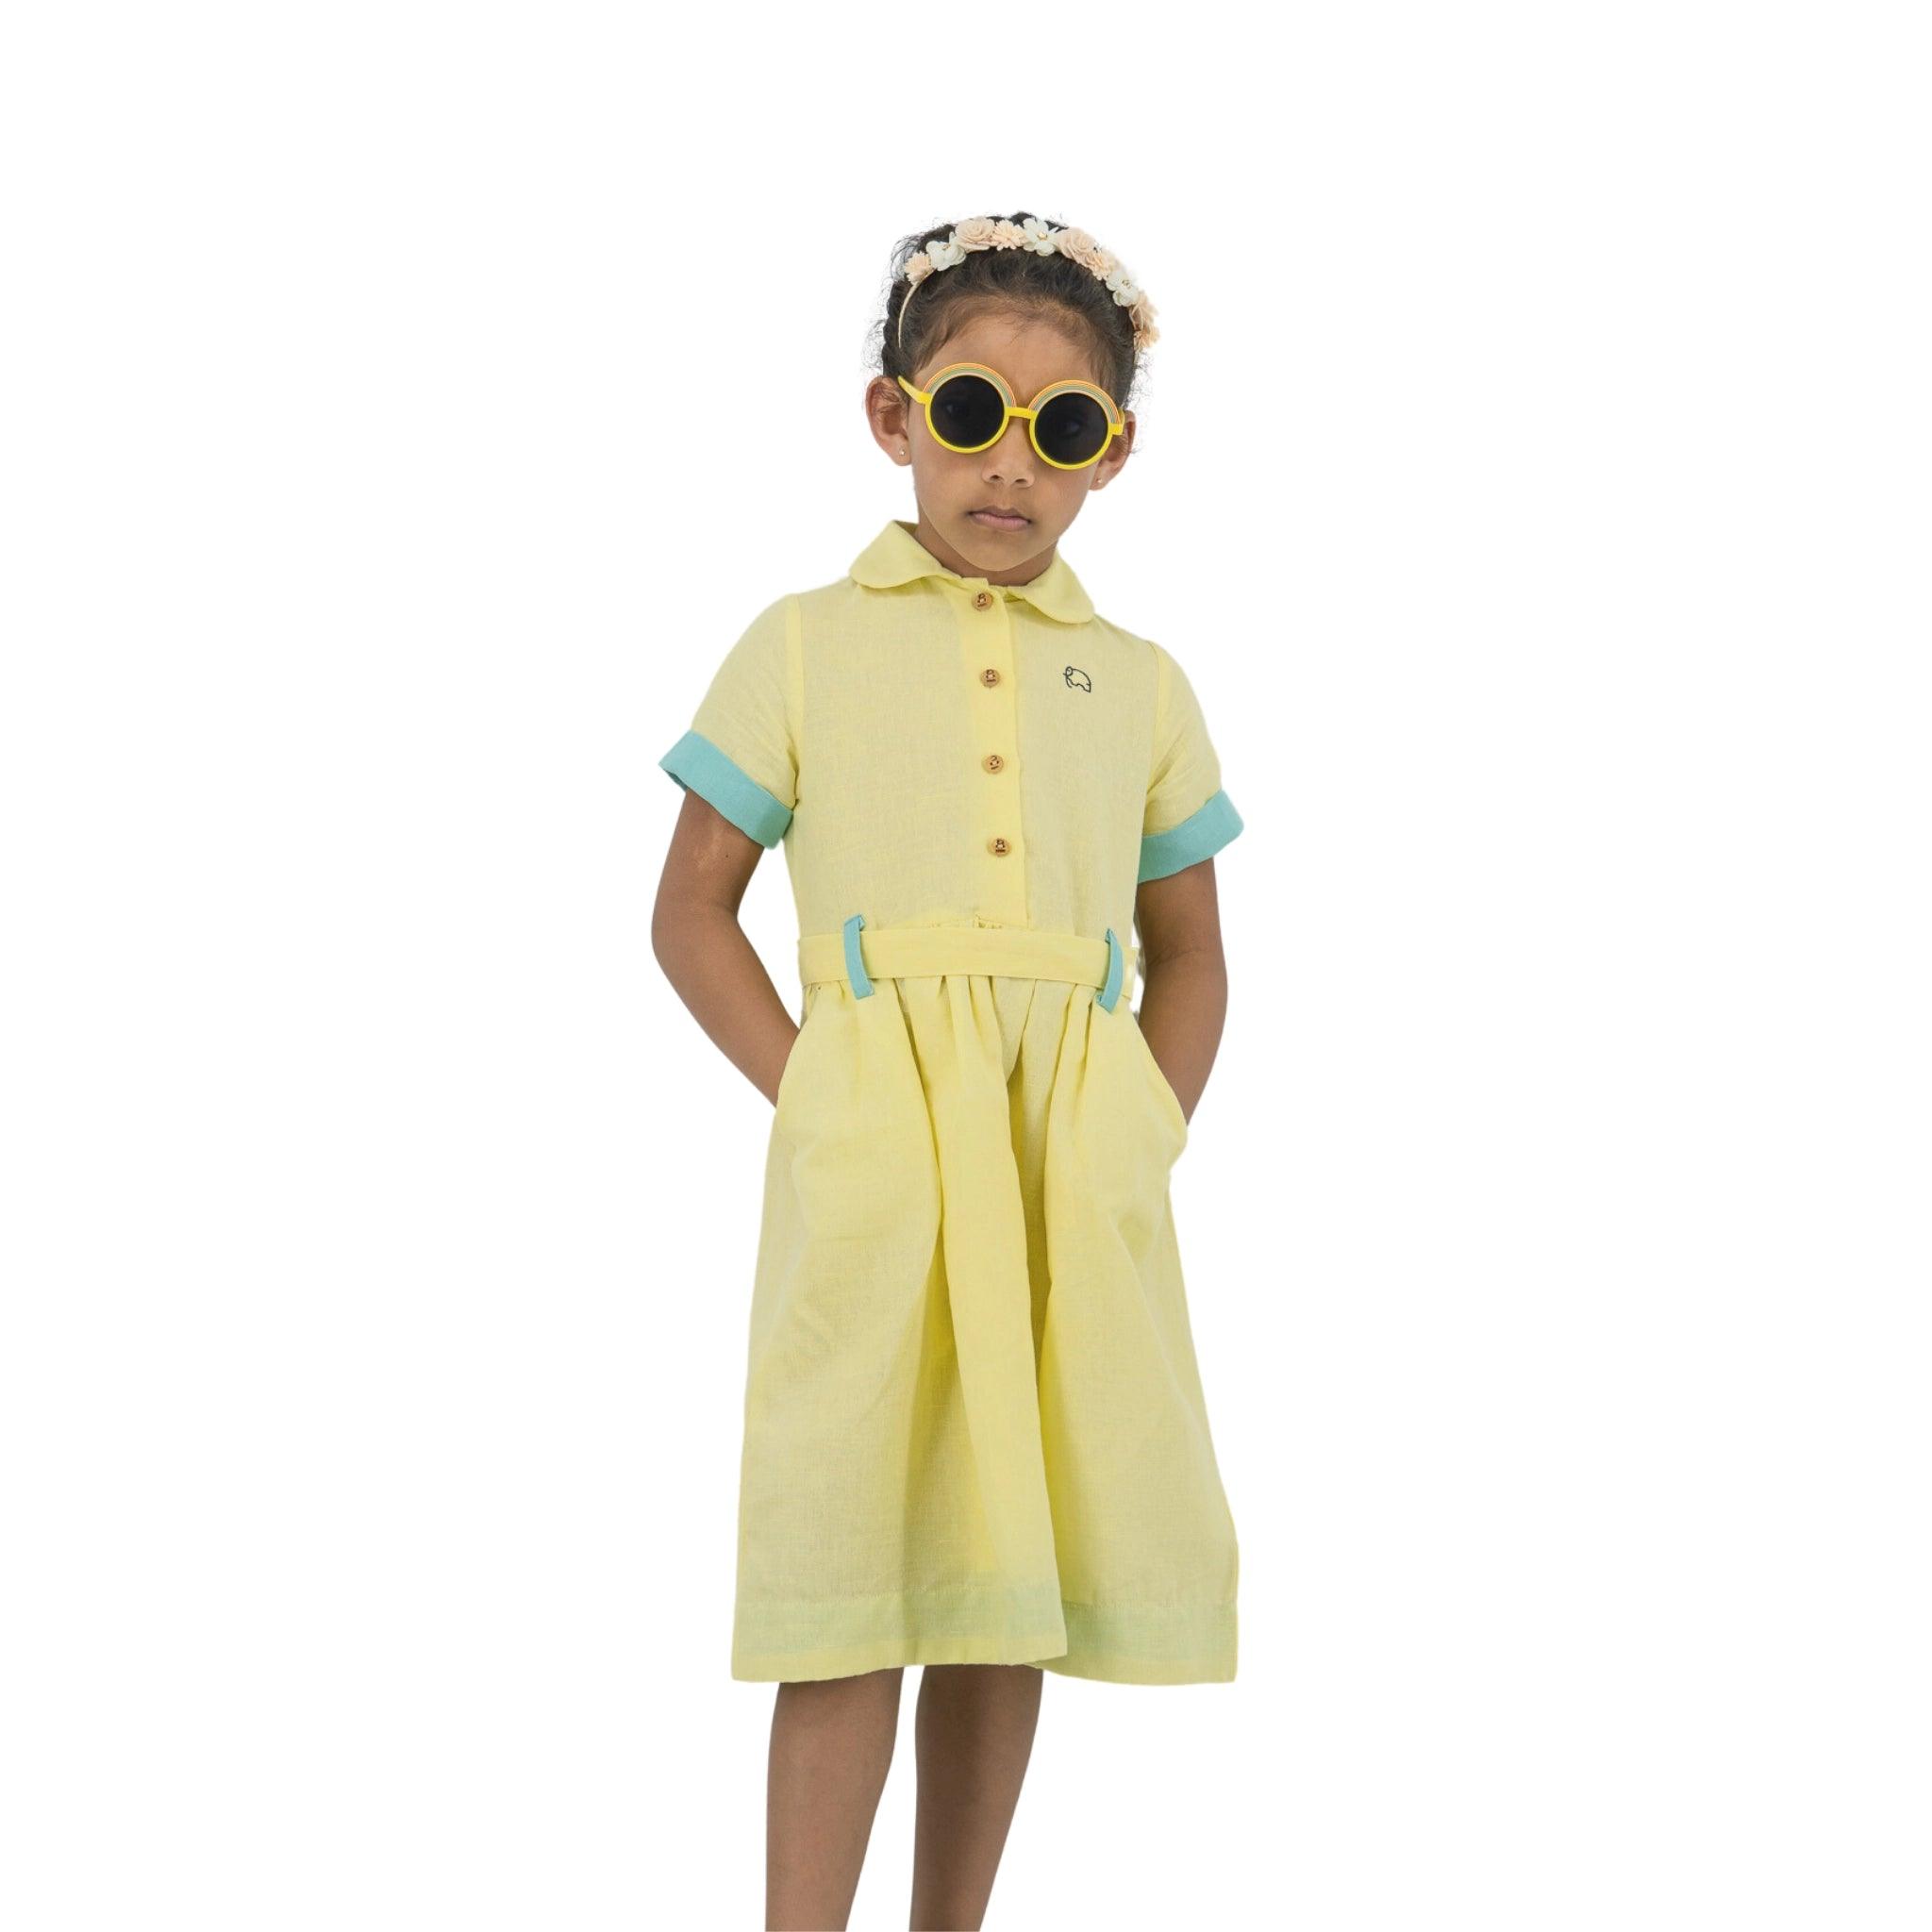 Young girl in a Karee Elfin Yellow Linen Below Knee Length Dress for Girls with blue trim, wearing yellow sunglasses and a white floral headband, standing against a white background.